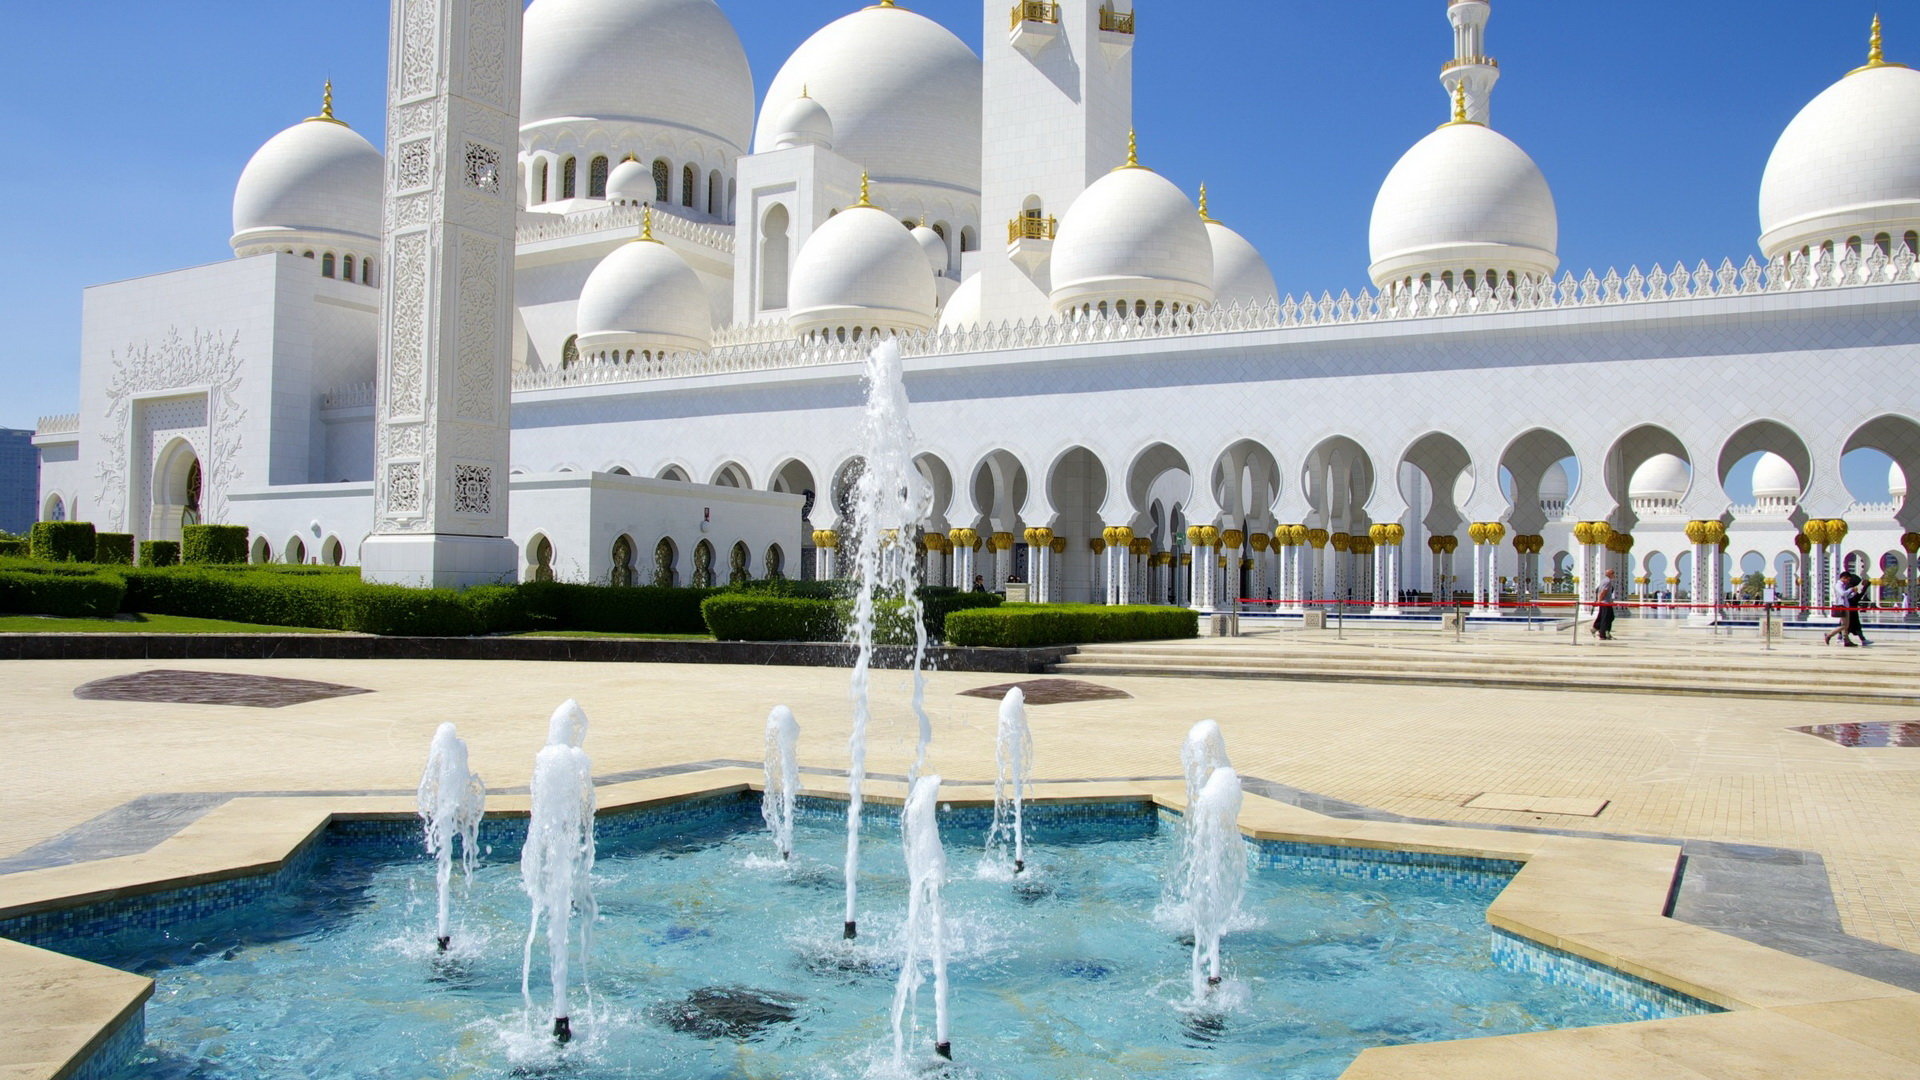 Download full hd 1080p Sheikh Zayed Grand Mosque desktop background ID:277823 for free